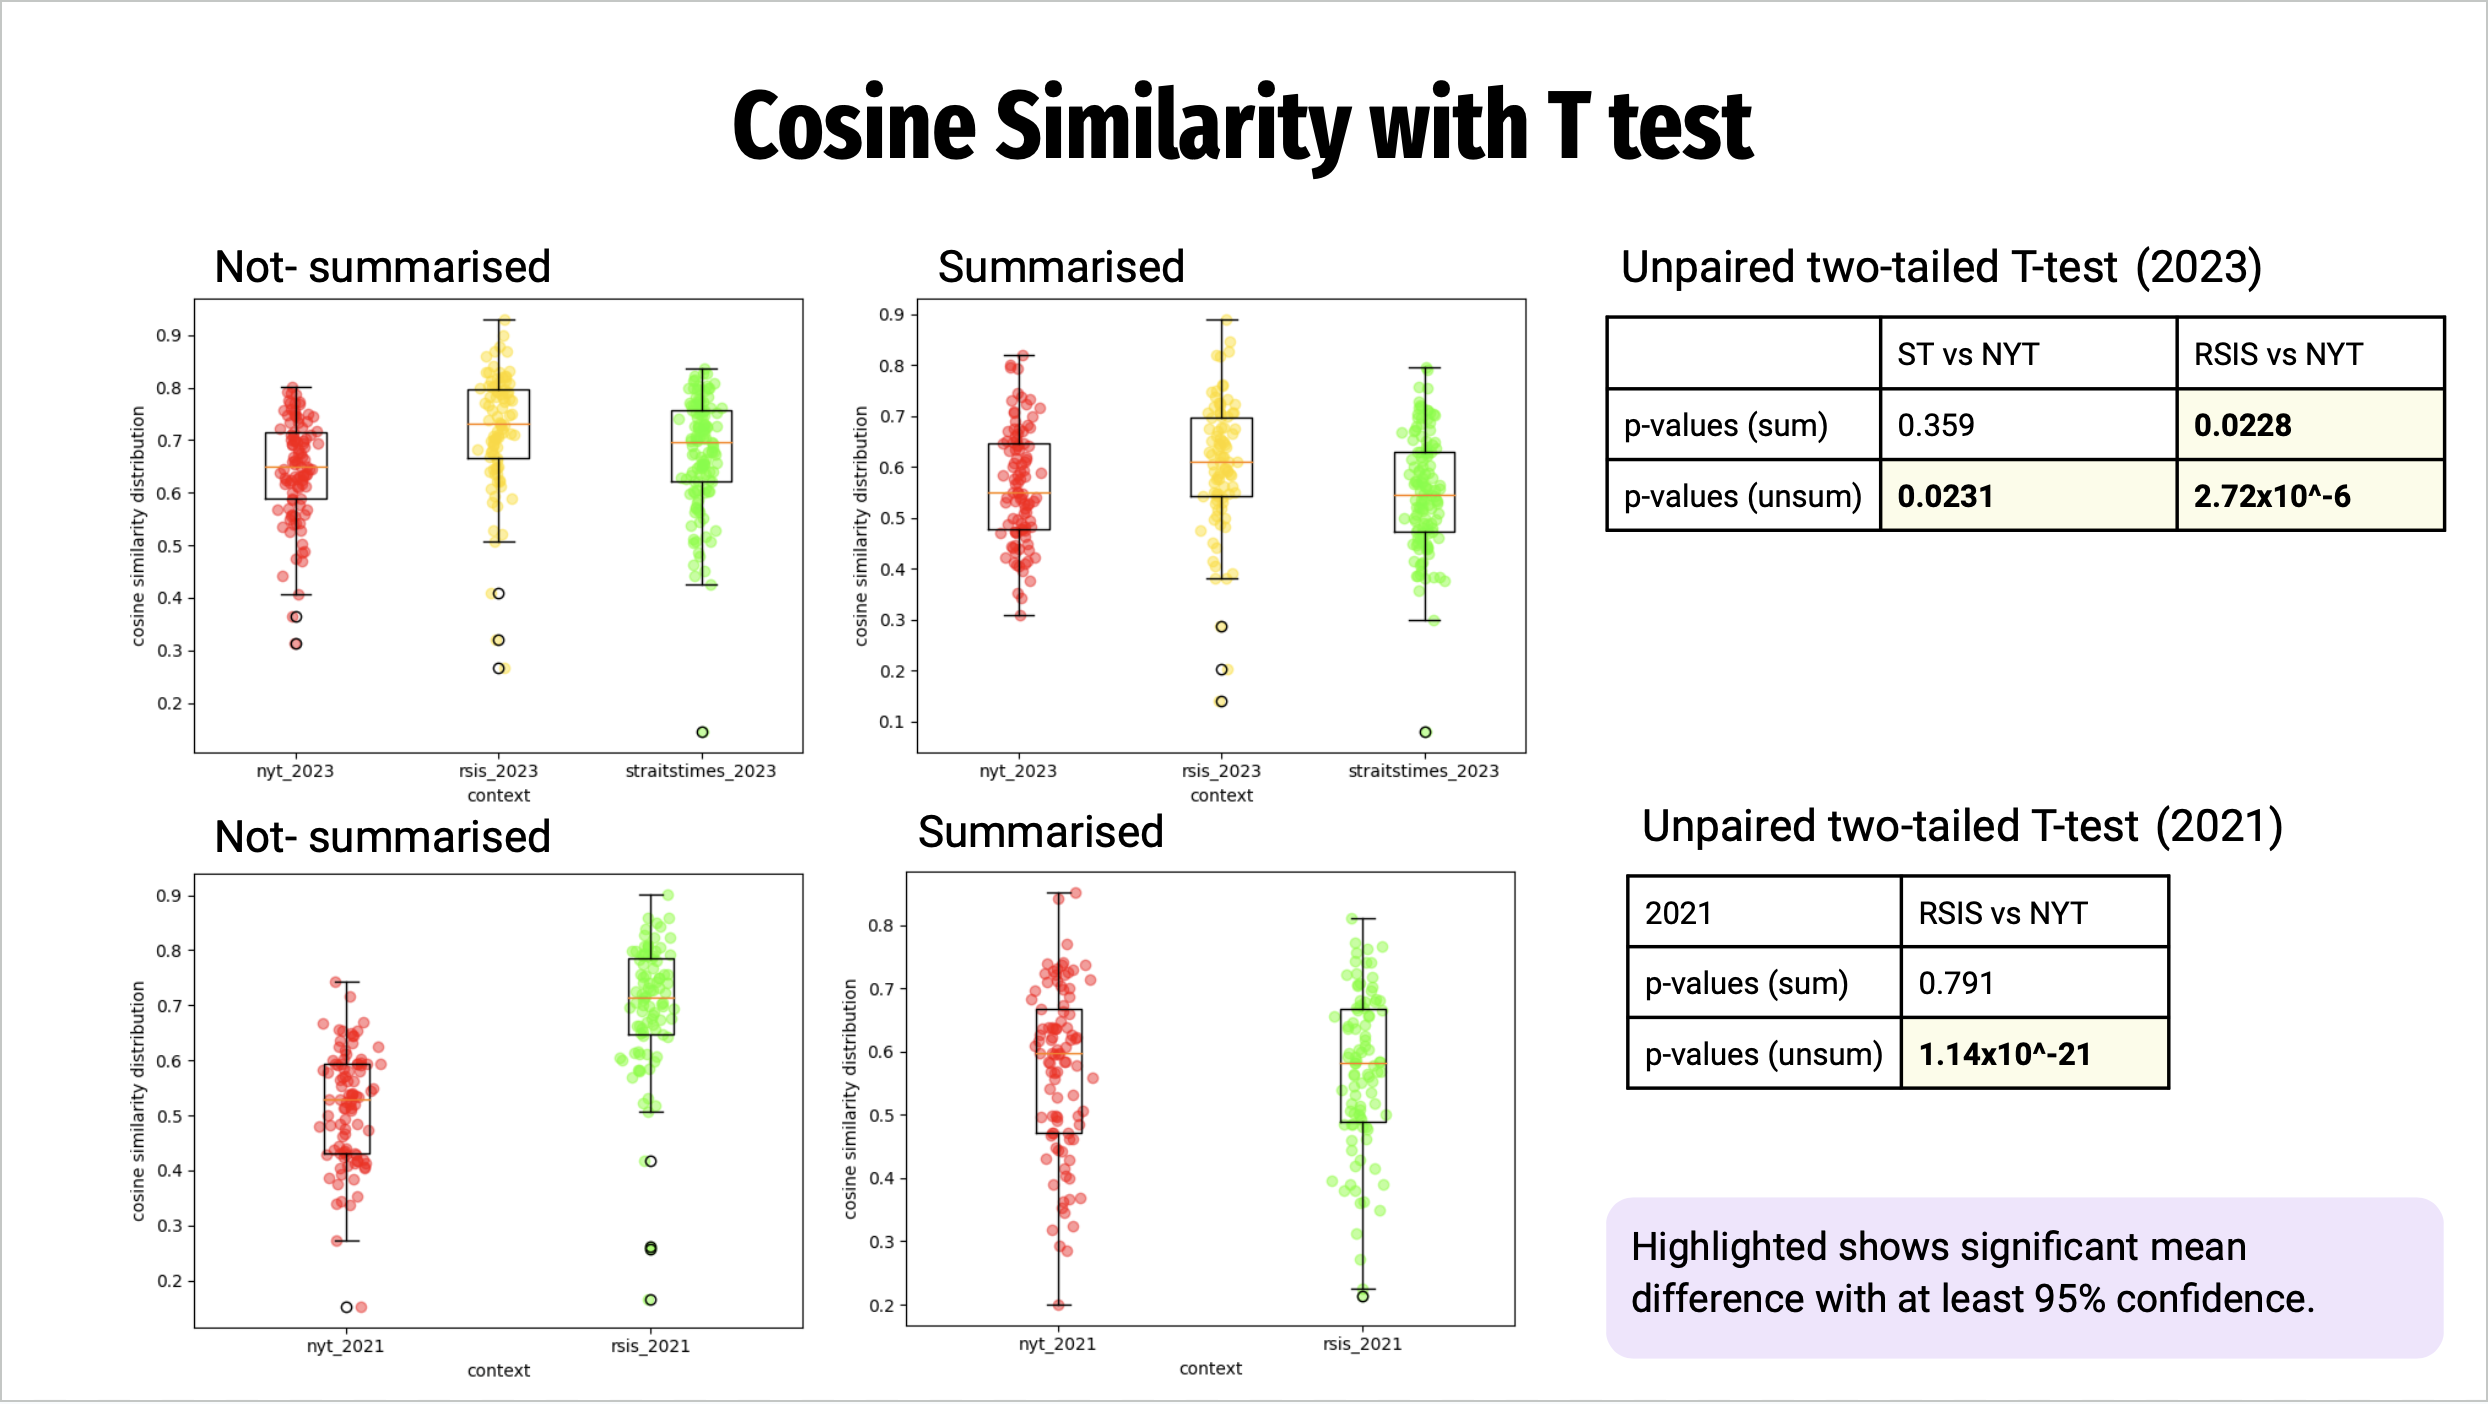 cosine-similarity-with-t-test.png